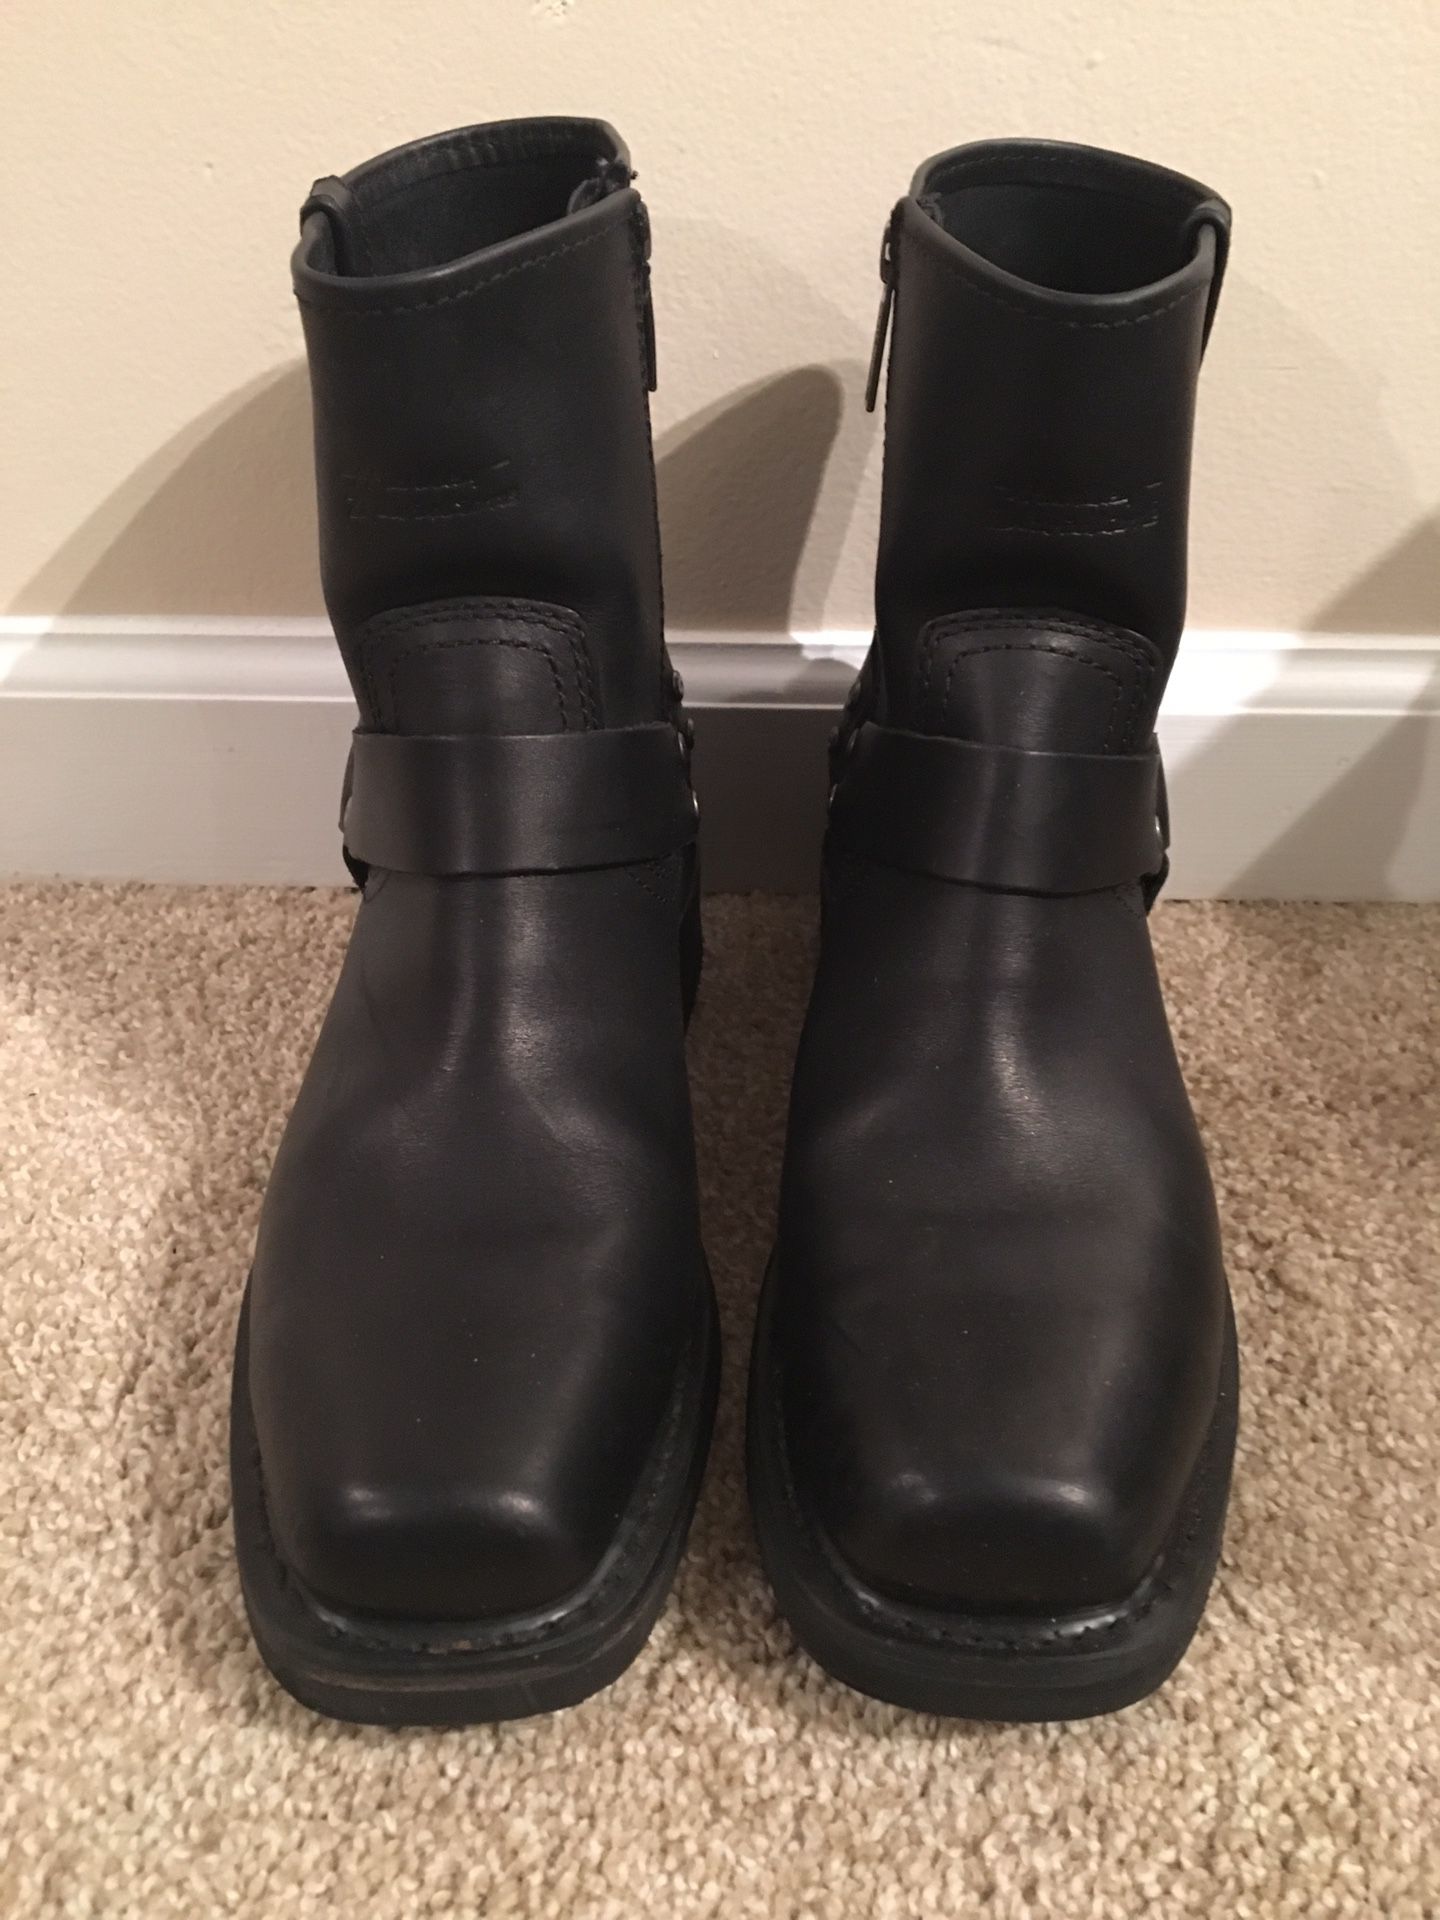 Harley-Davidson Men’s 8.5 Leather Boots in absolutely new condition. Worn once.